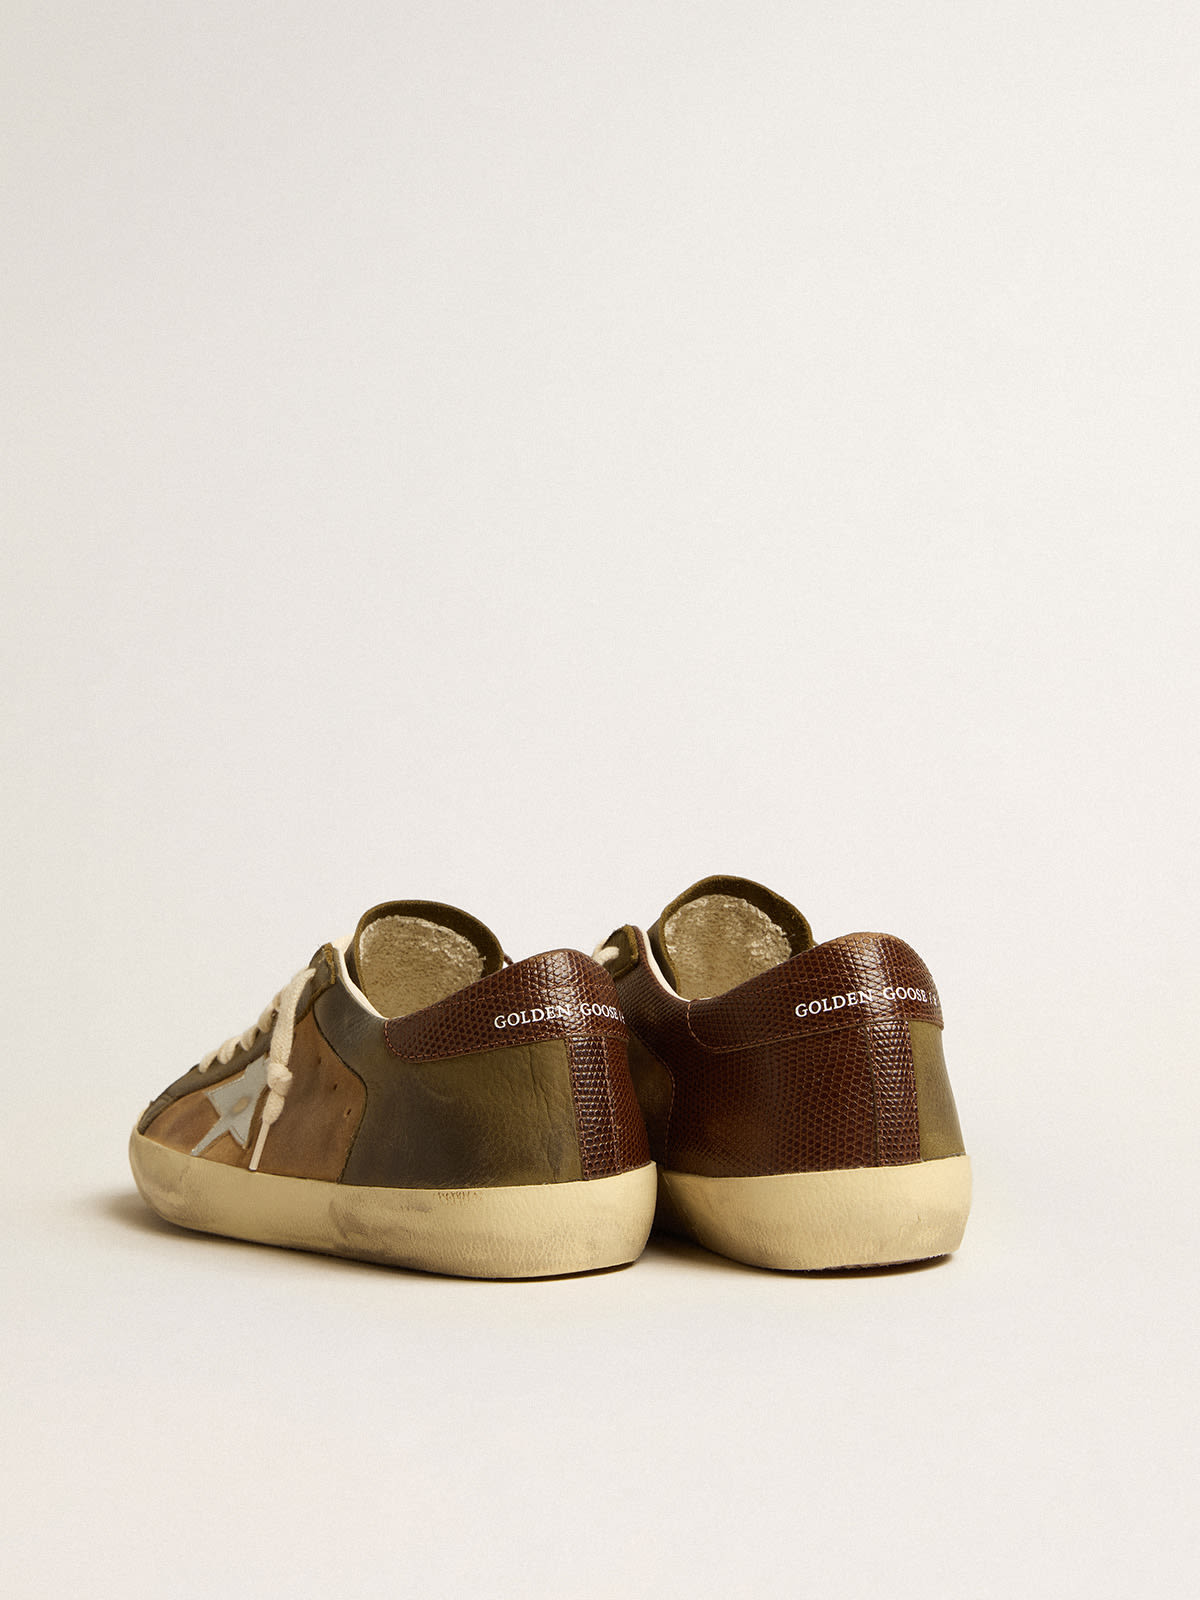 Golden Goose - Super-Star LTD in green leather and tobacco-colored suede with silver star in 